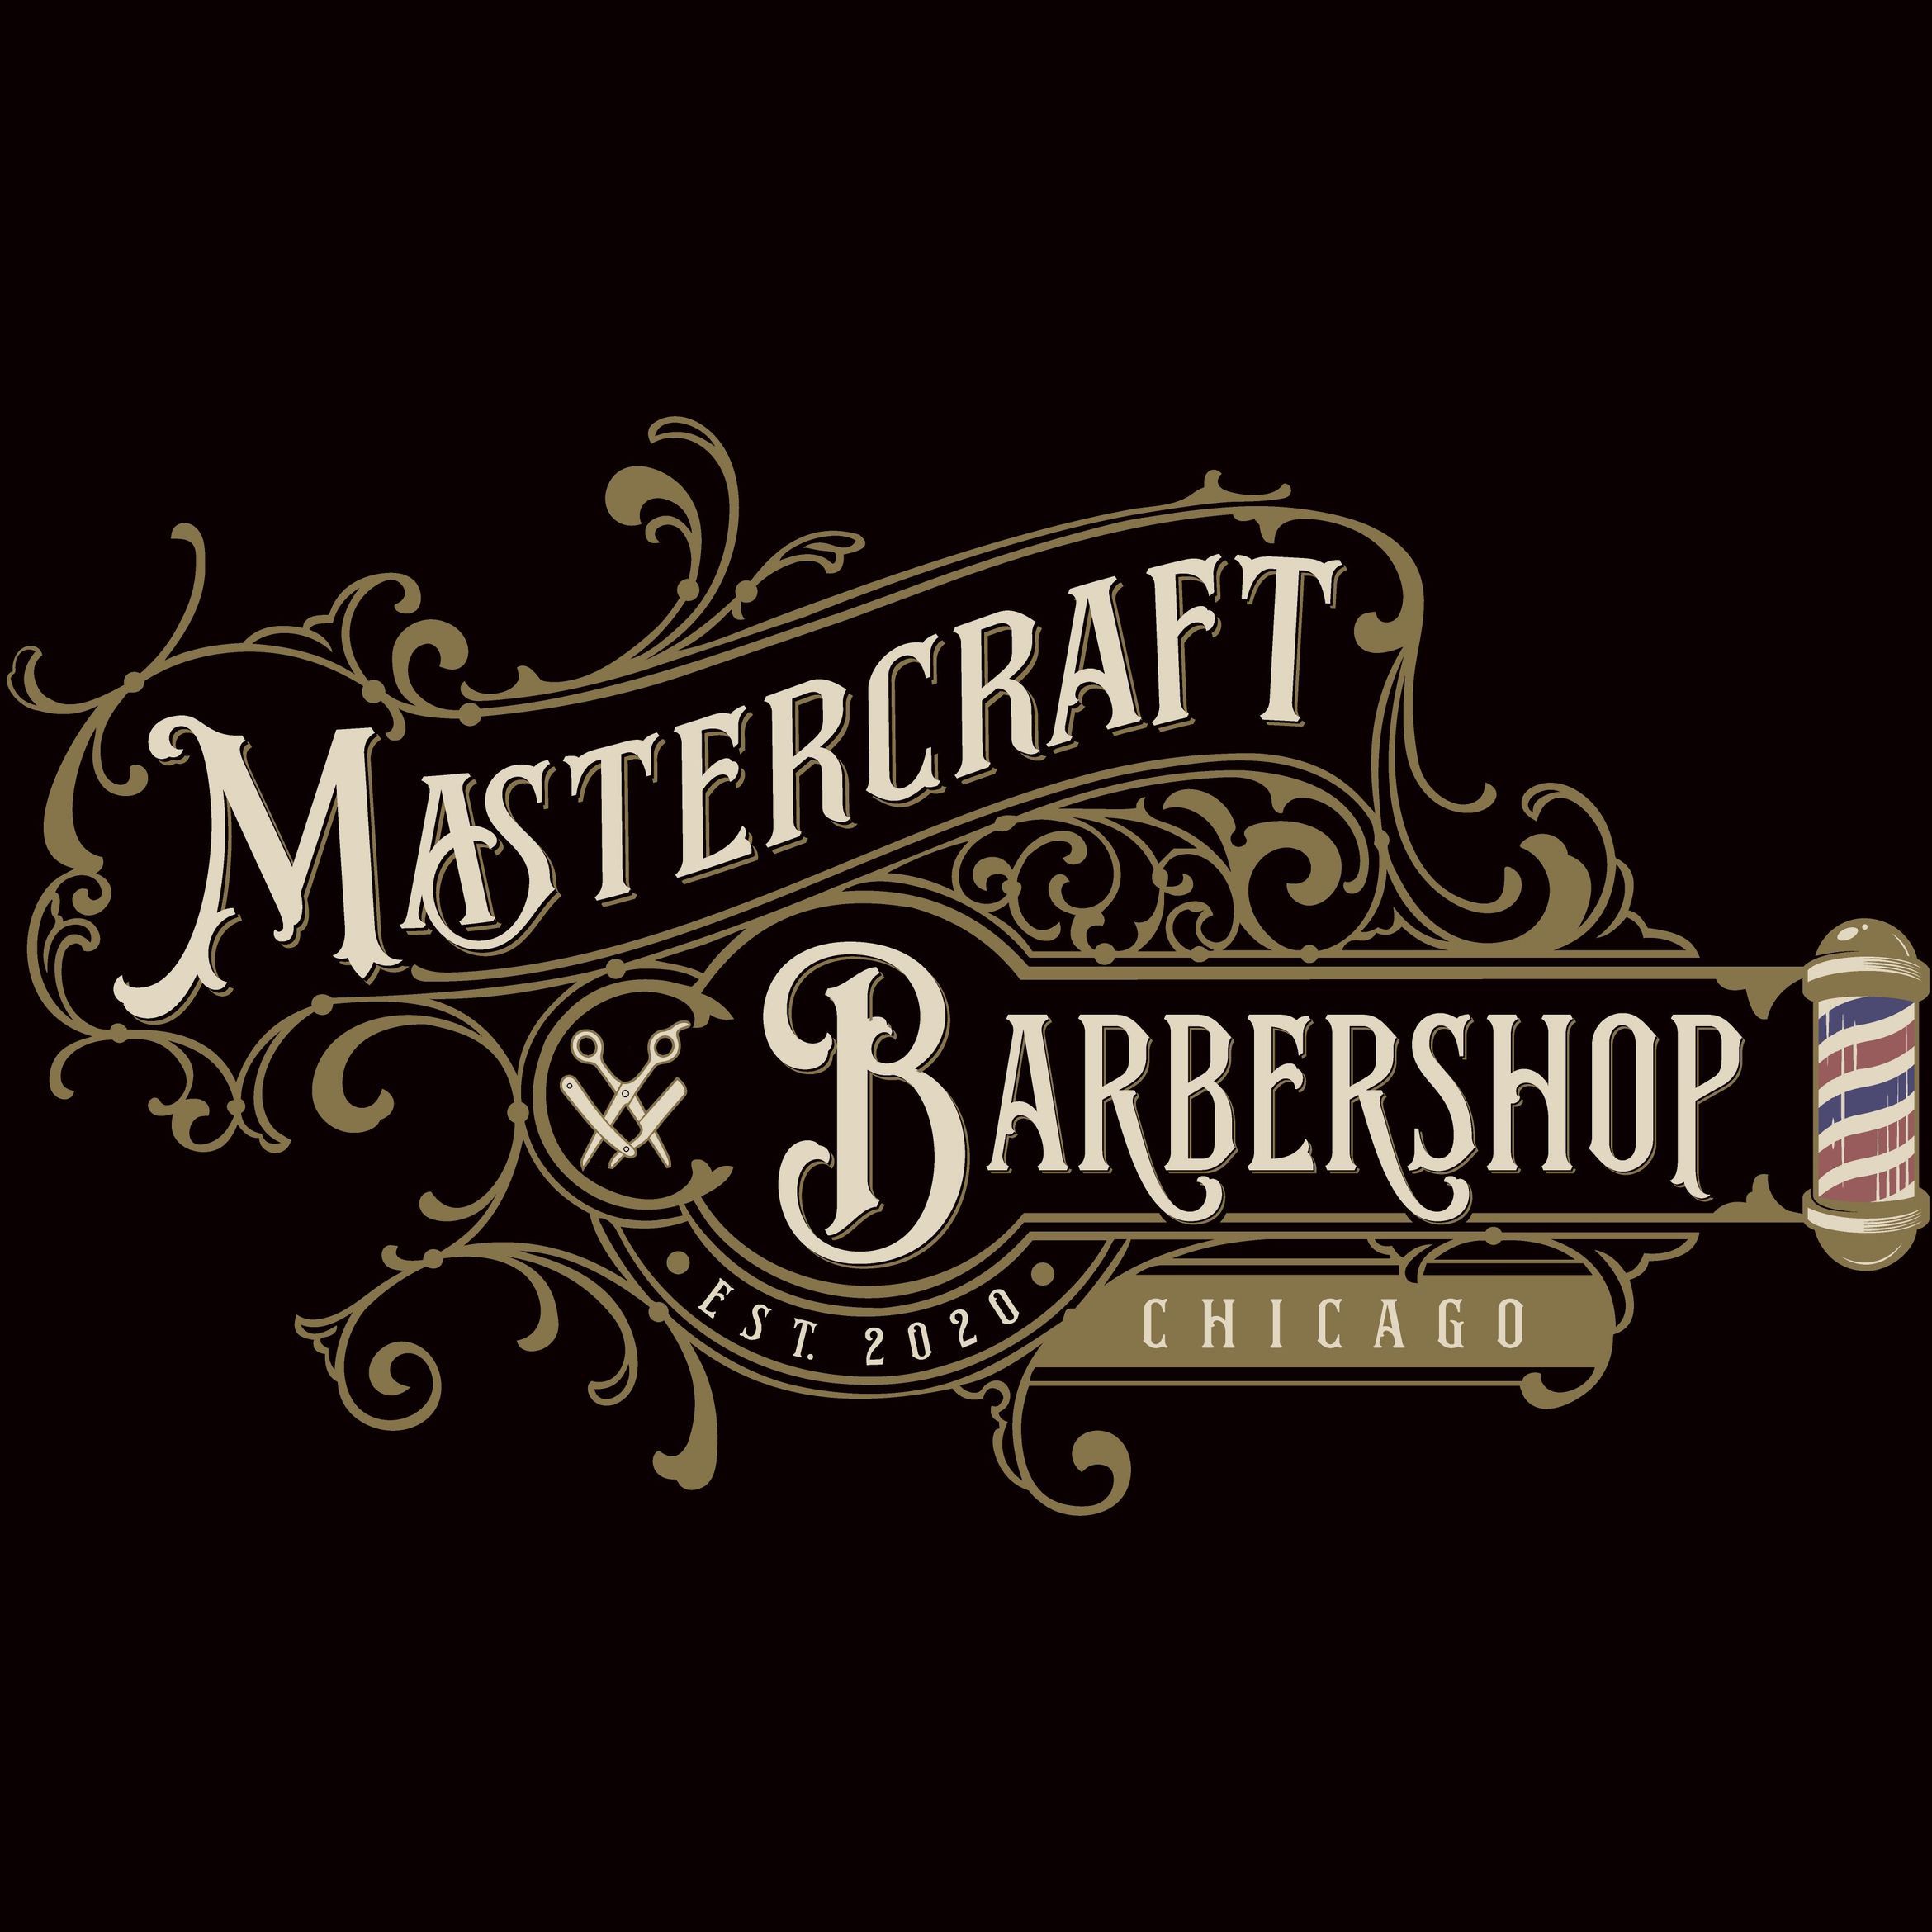 Mastercraft Barbershop, 3540 W North ave, Suite A, Chicago, 60647